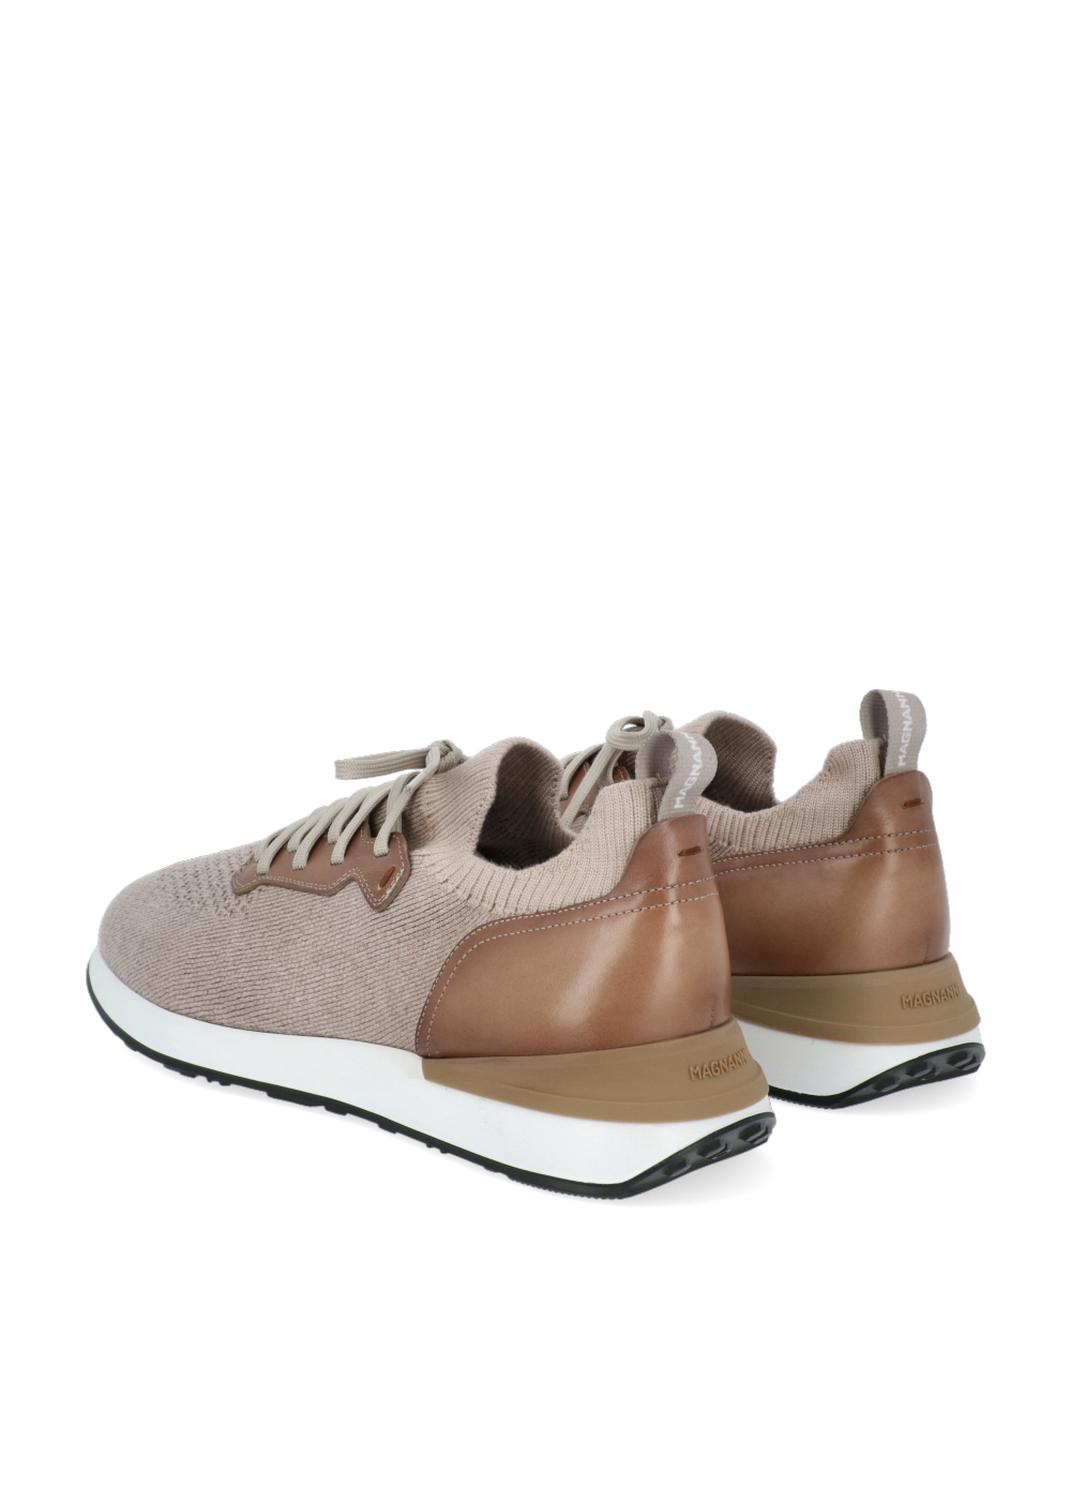 Magnanni Sneakers MGN-25612